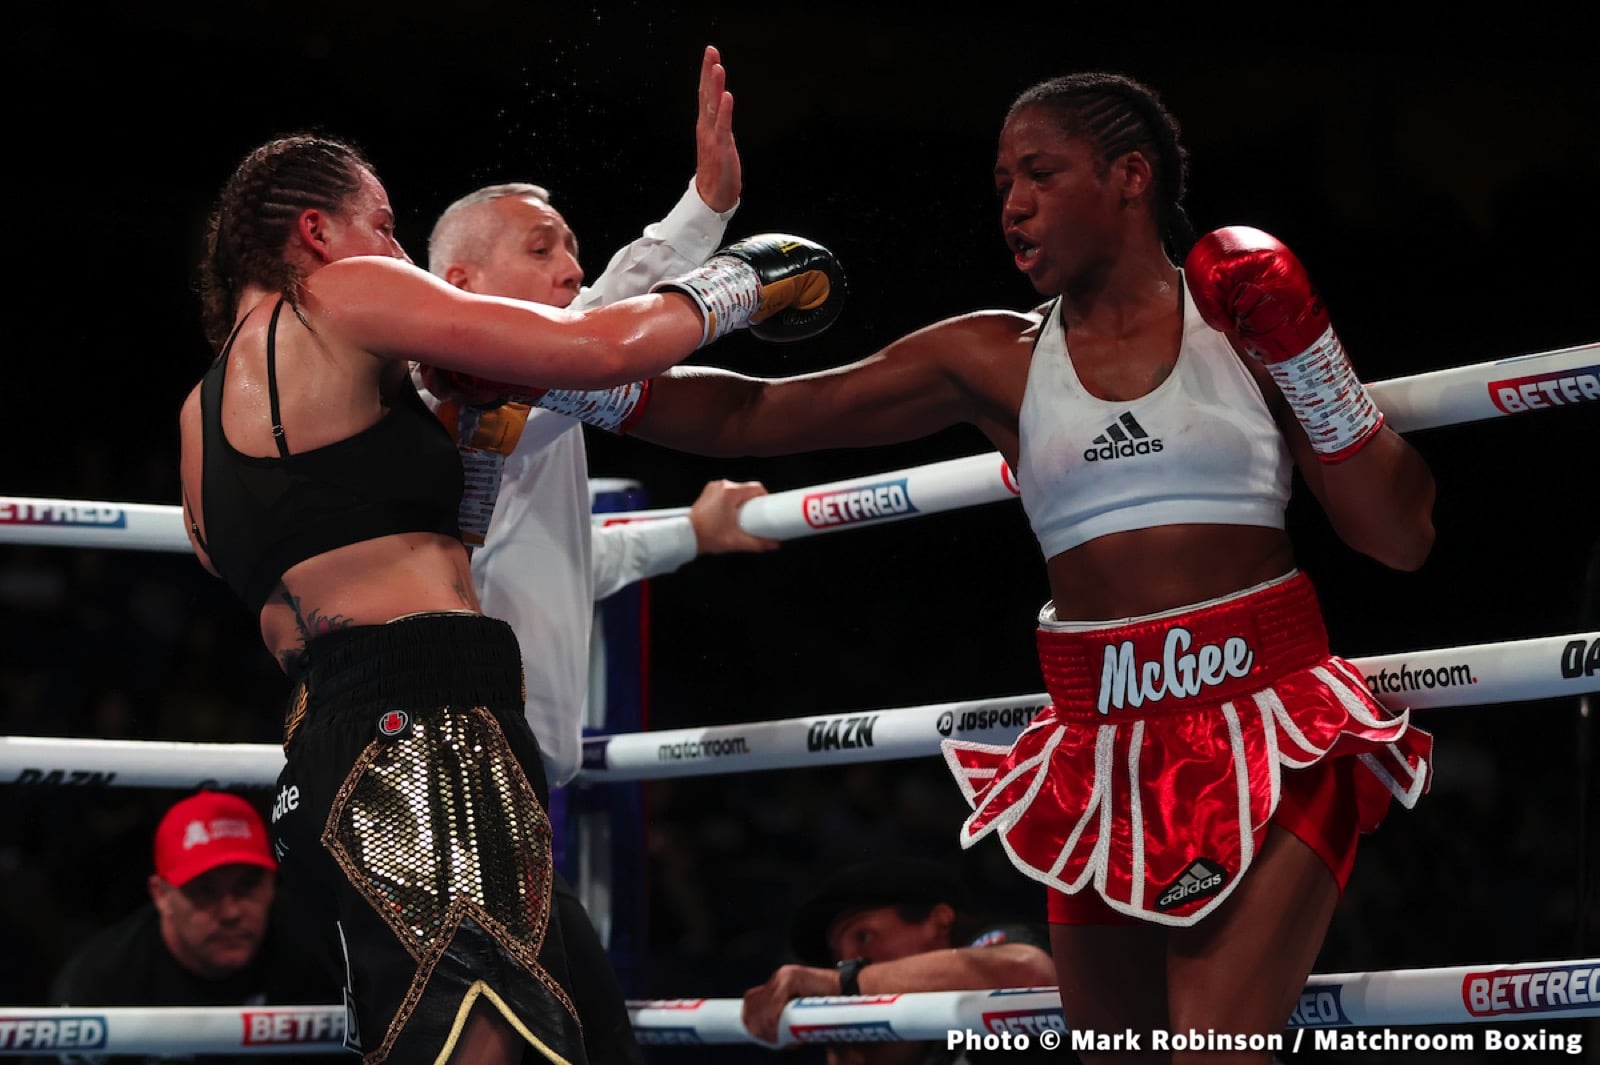 Image: Boxing Results: Chantelle Cameron Defeats Mary McGee for Unification Win!